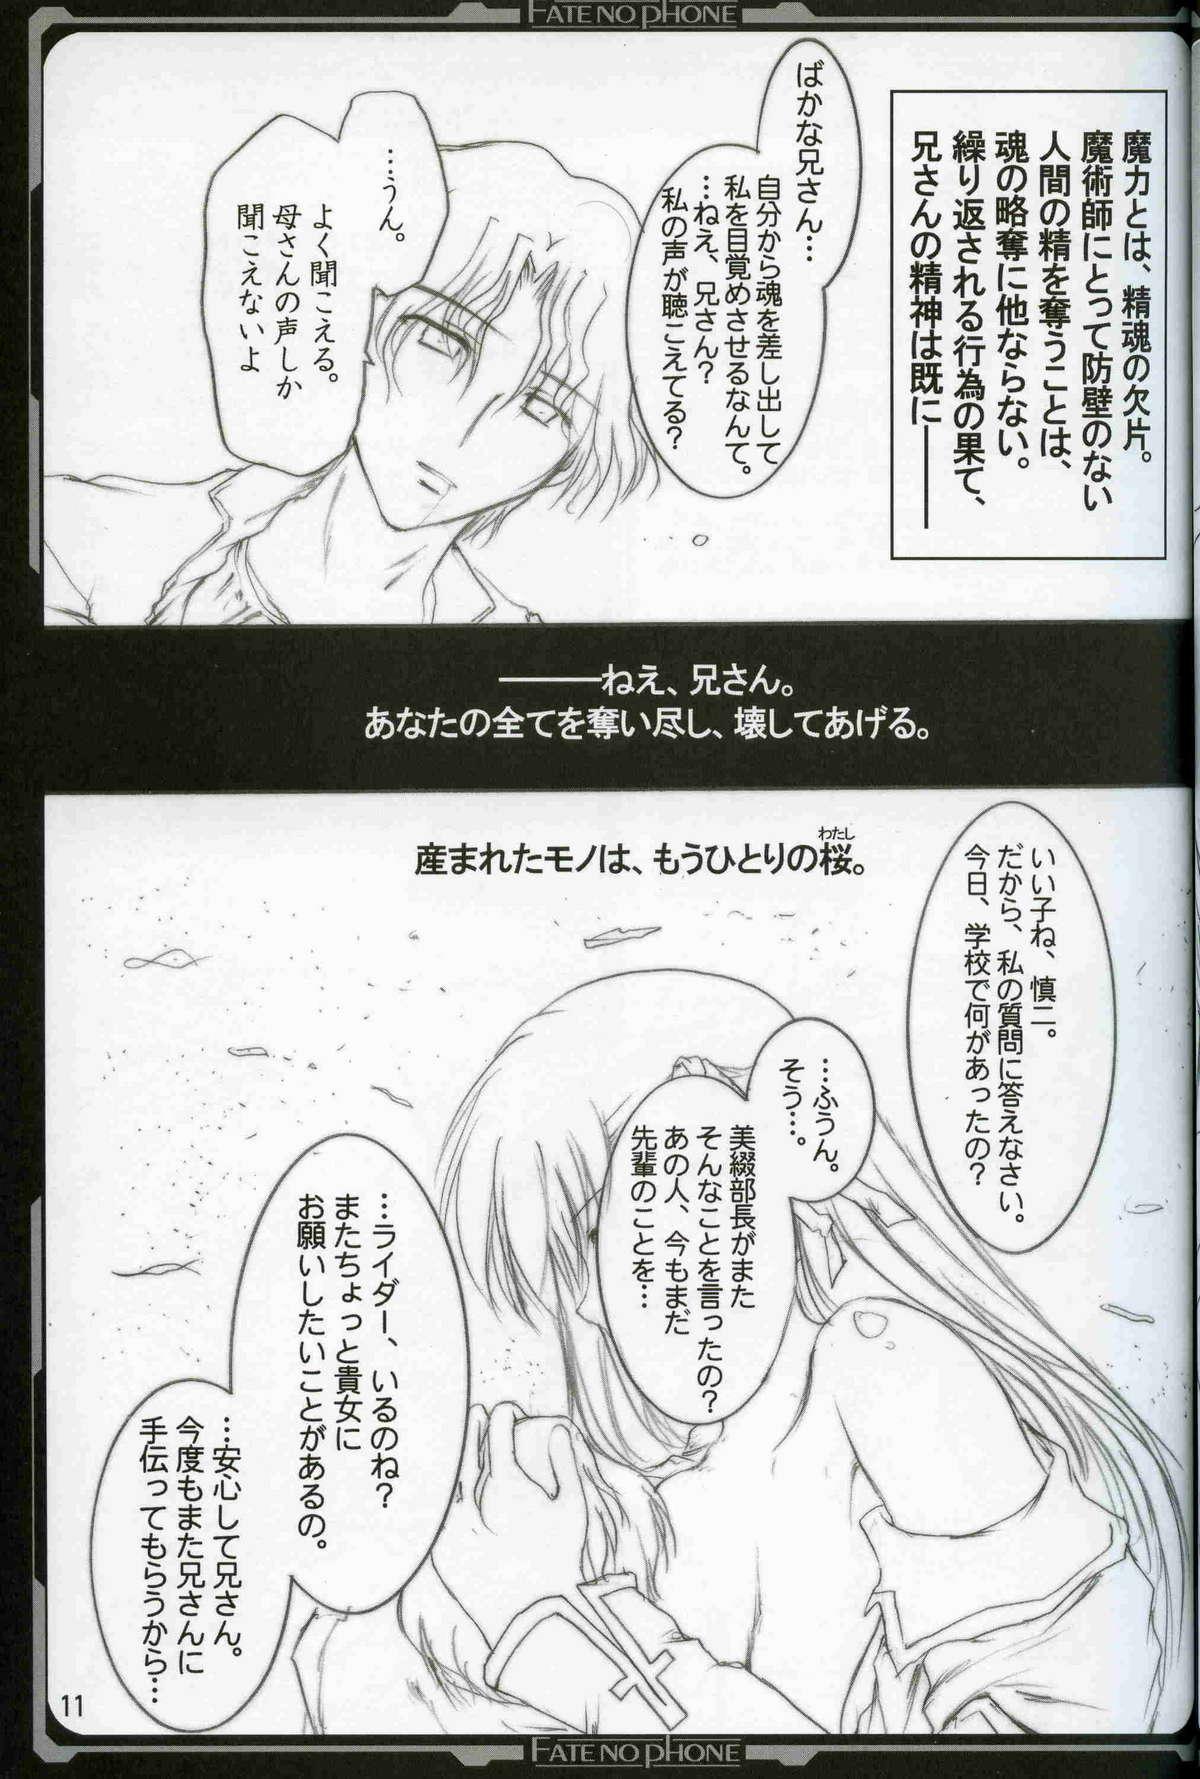 Sislovesme Fate/no phone - Fate stay night Khmer - Page 10